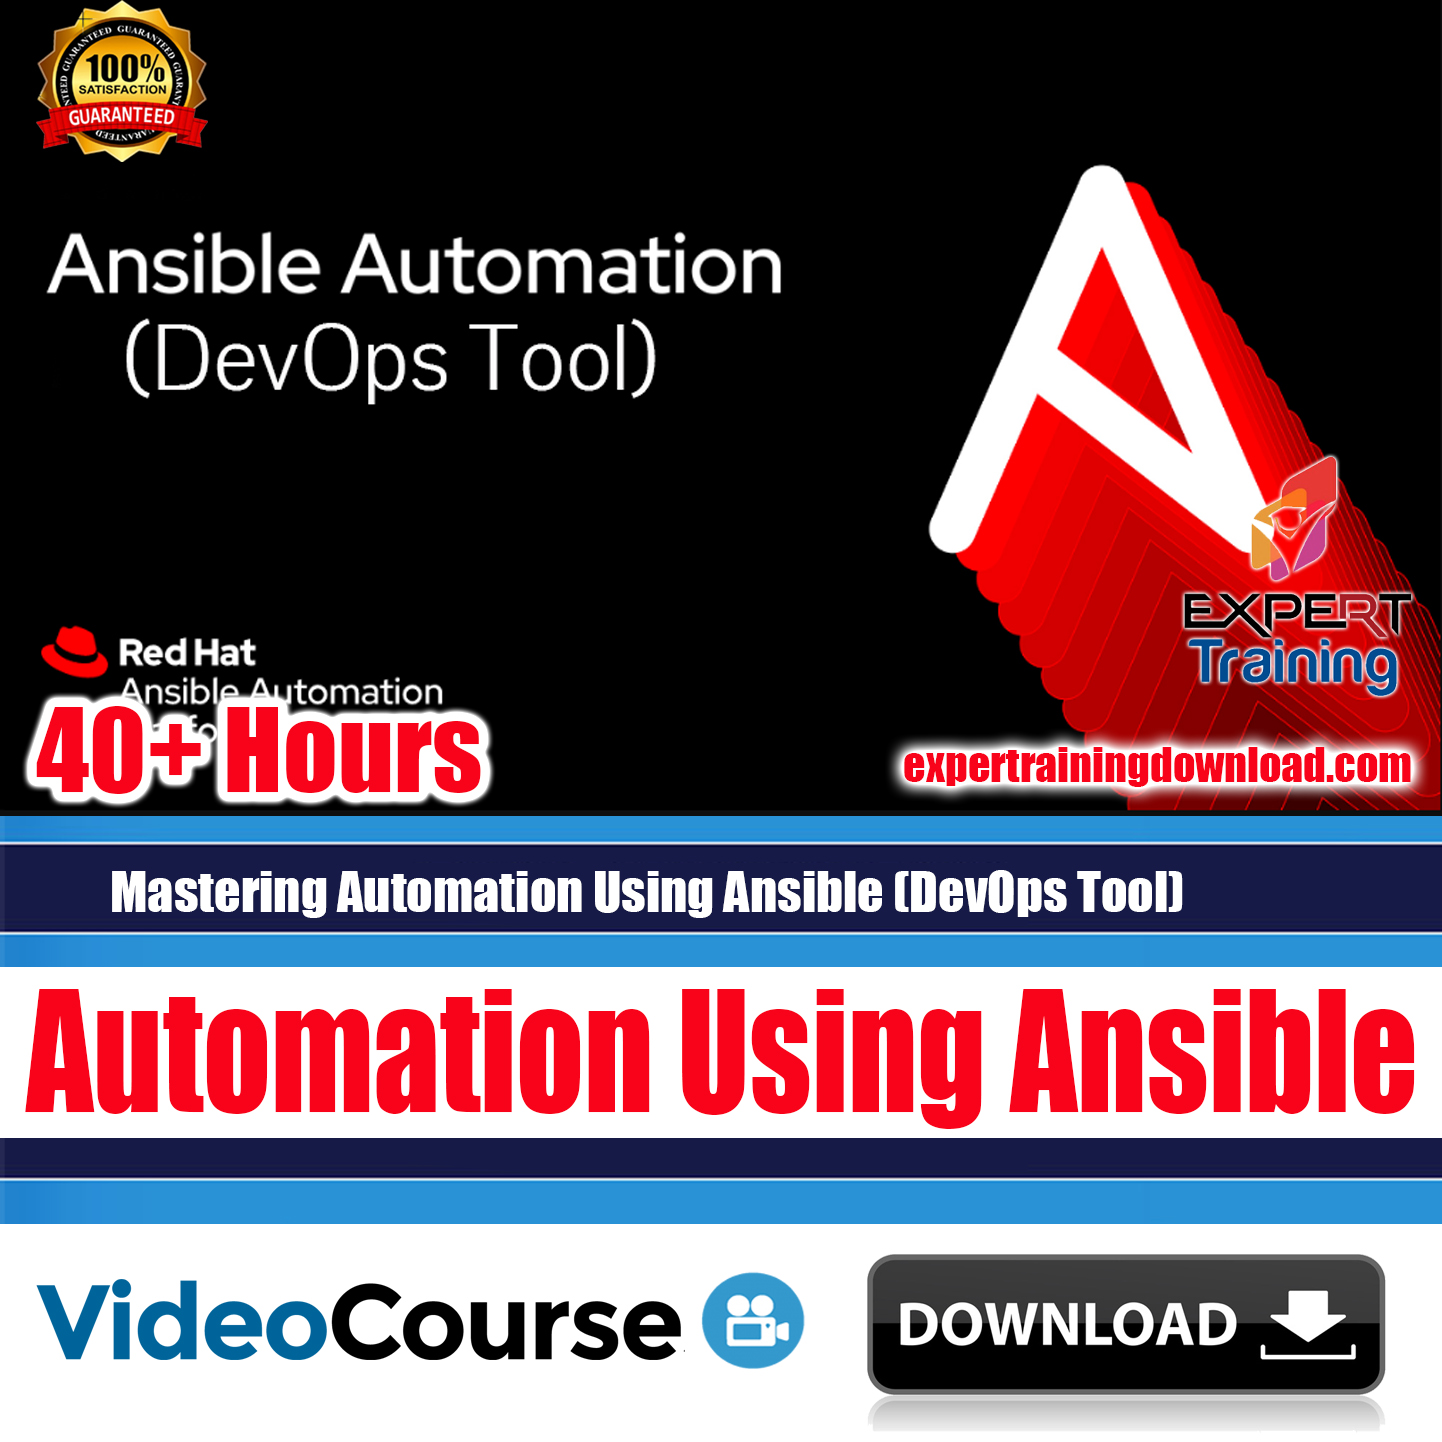 Mastering Automation Using Ansible (DevOps Tool)